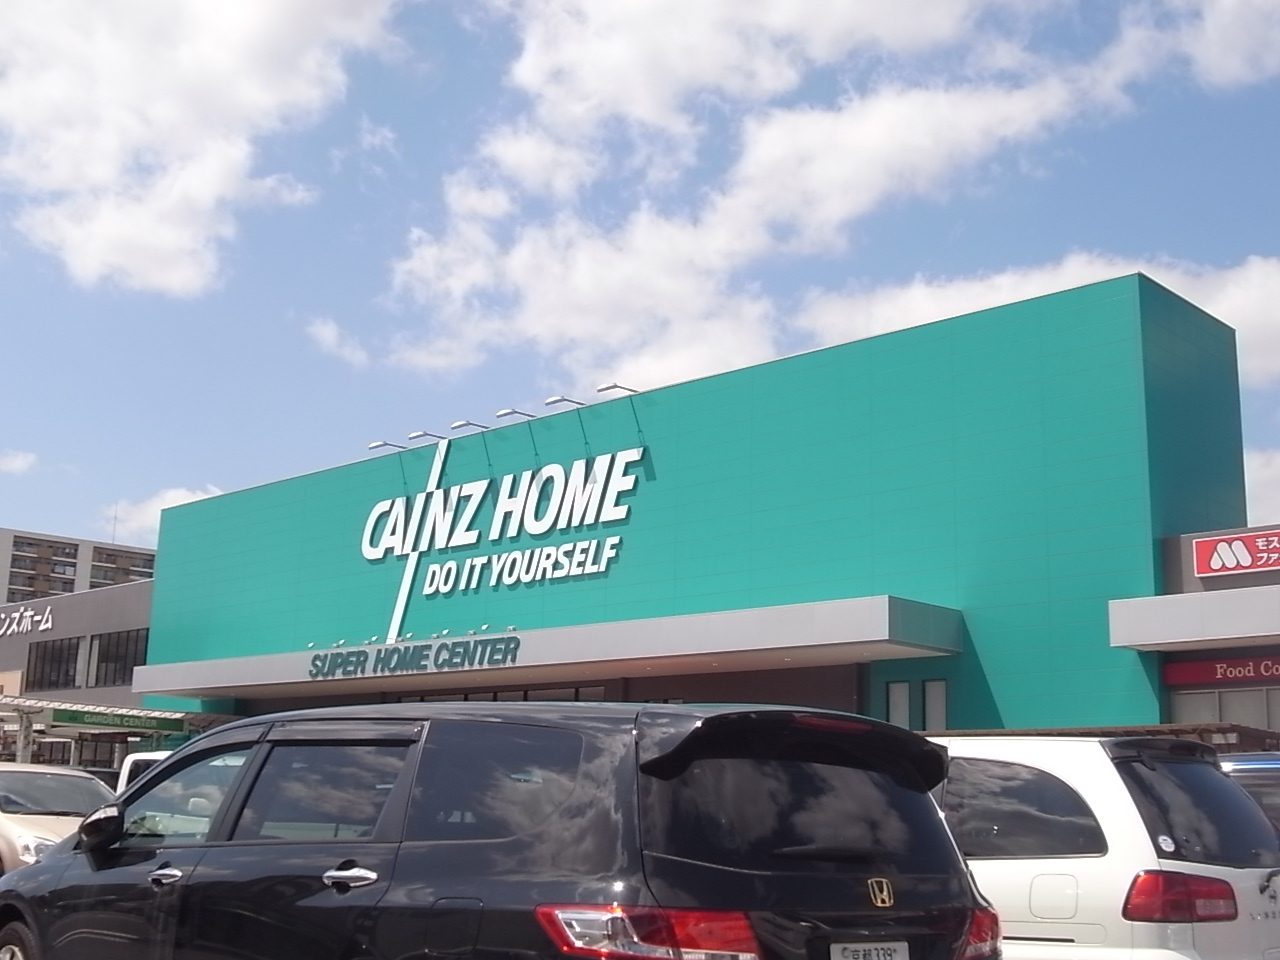 Home center. Cain home Nagoya Hotta store up (home improvement) 1300m